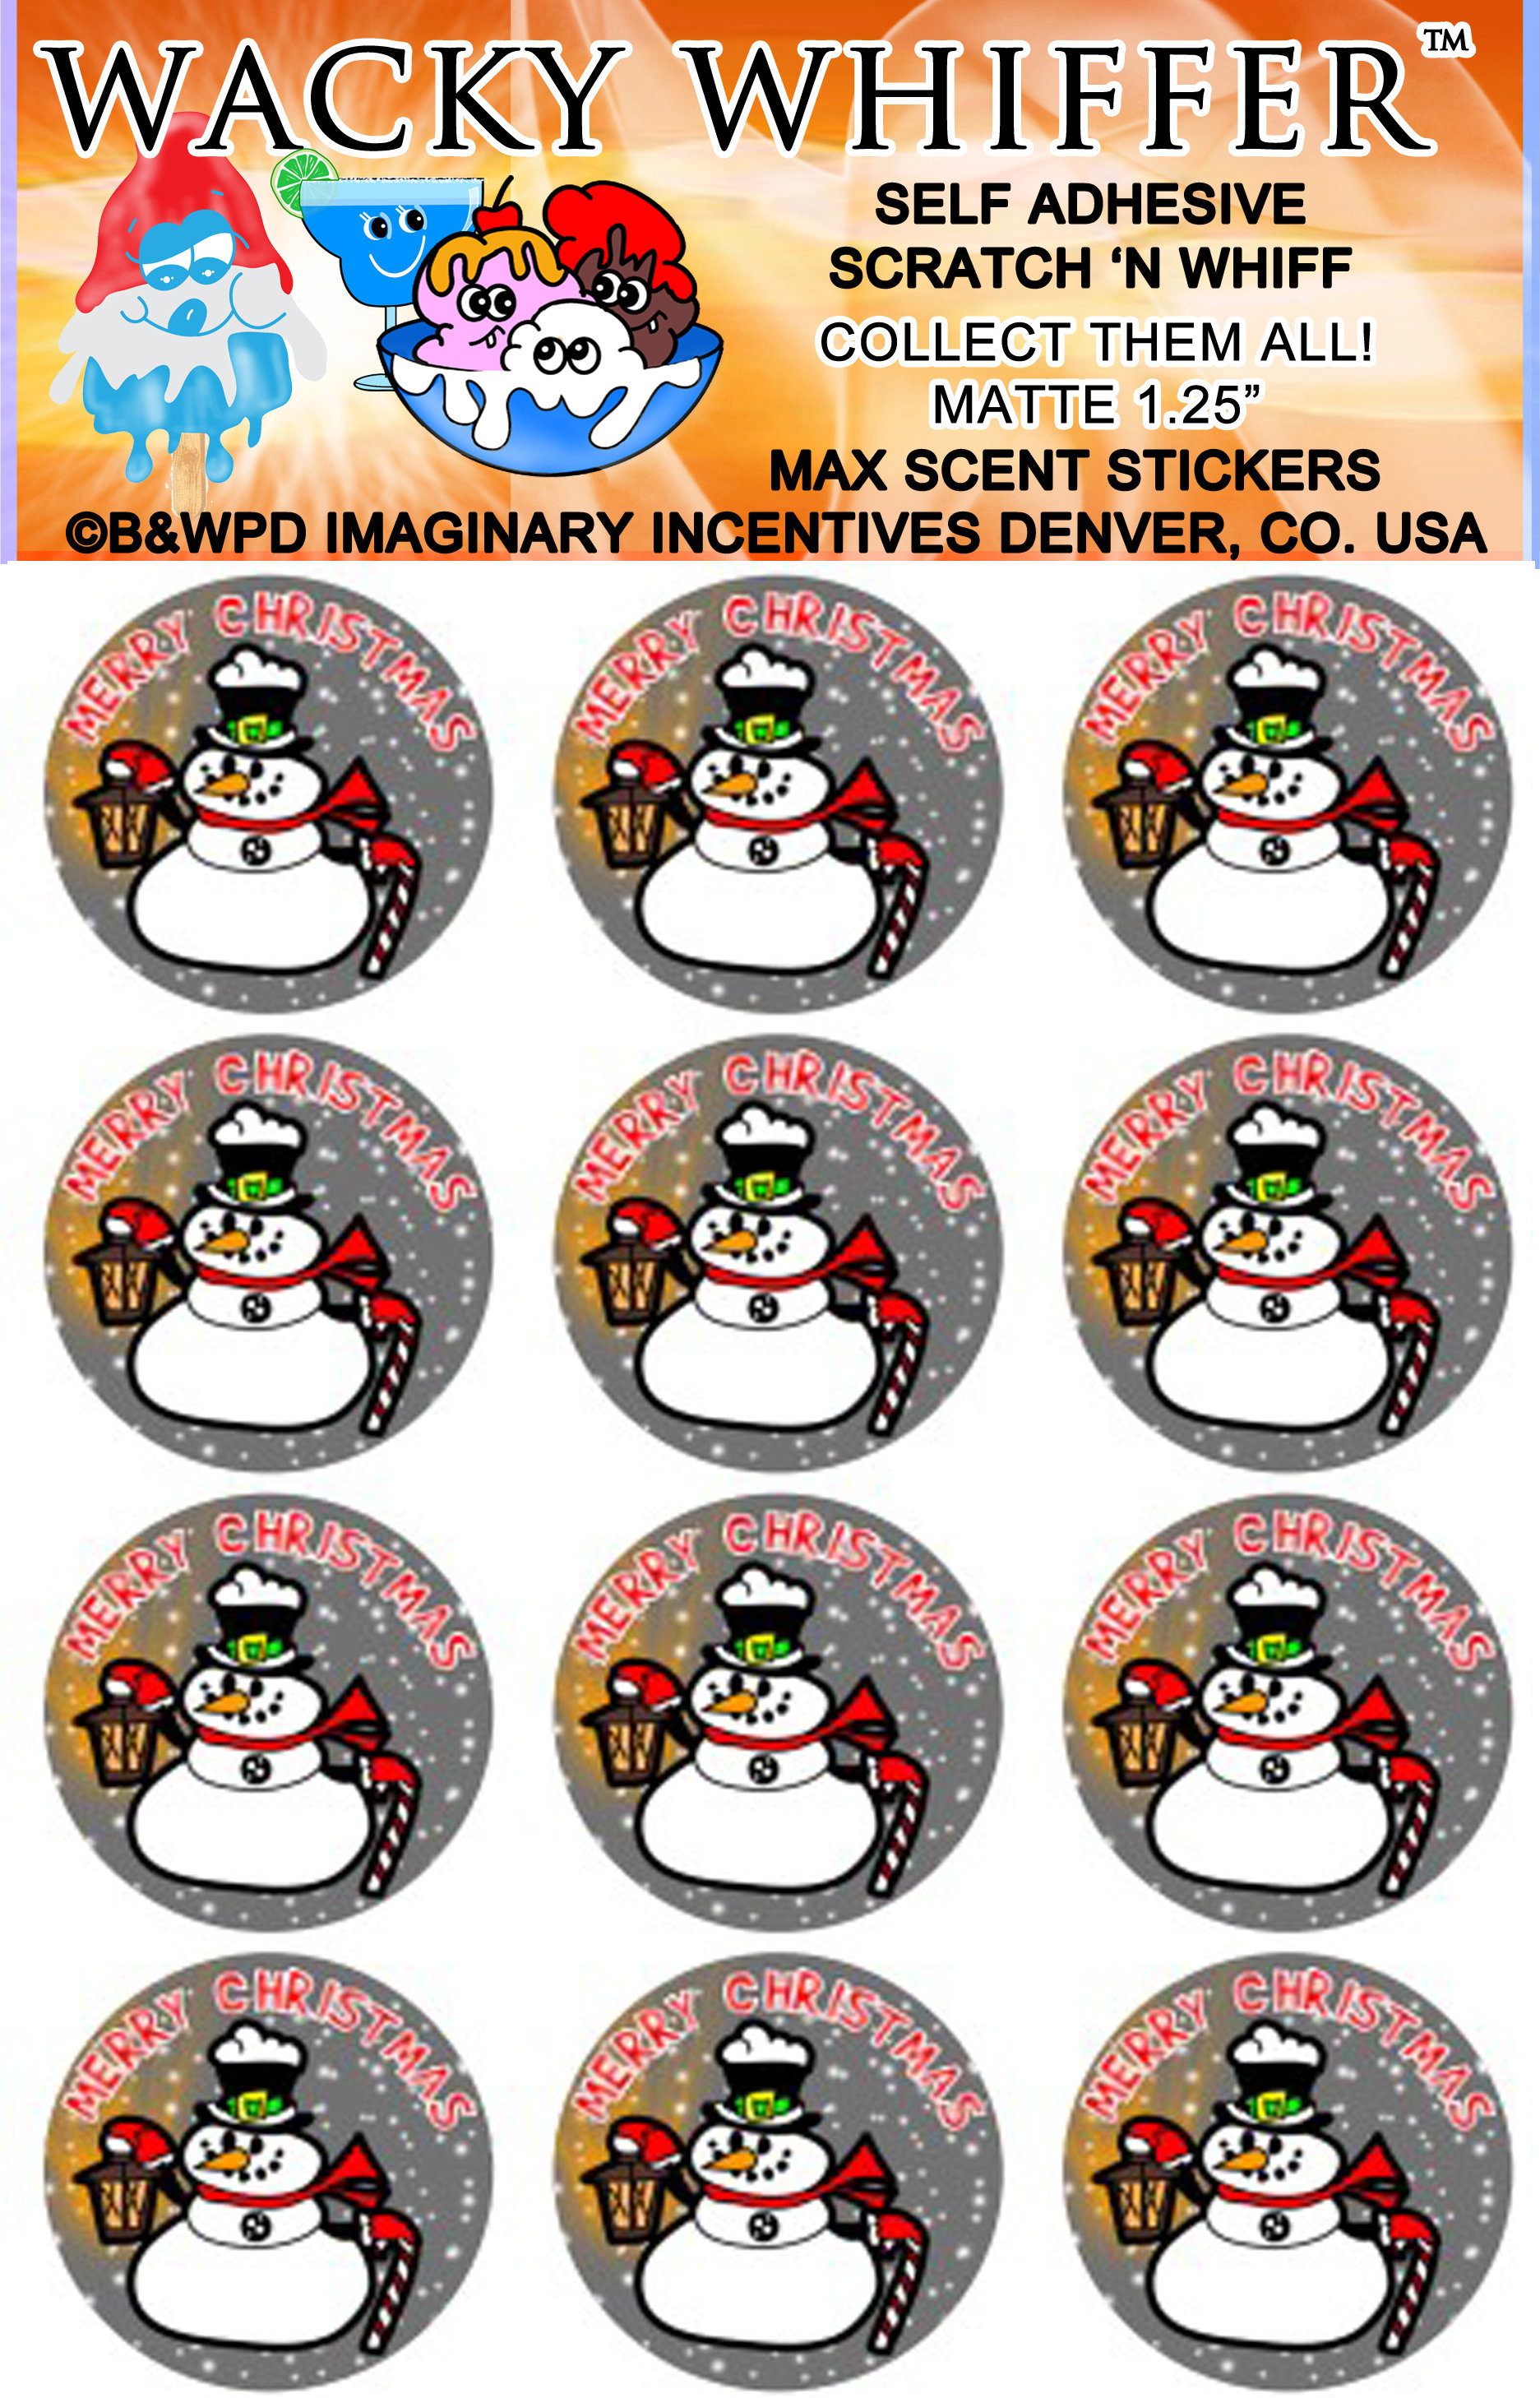 Christmas 2021 Snowman Candy Cane Max Scent Matte Scratch and Sniff Stickers WACKY WHIFFER MAX Scent Matte Jumbo Sized Stickers